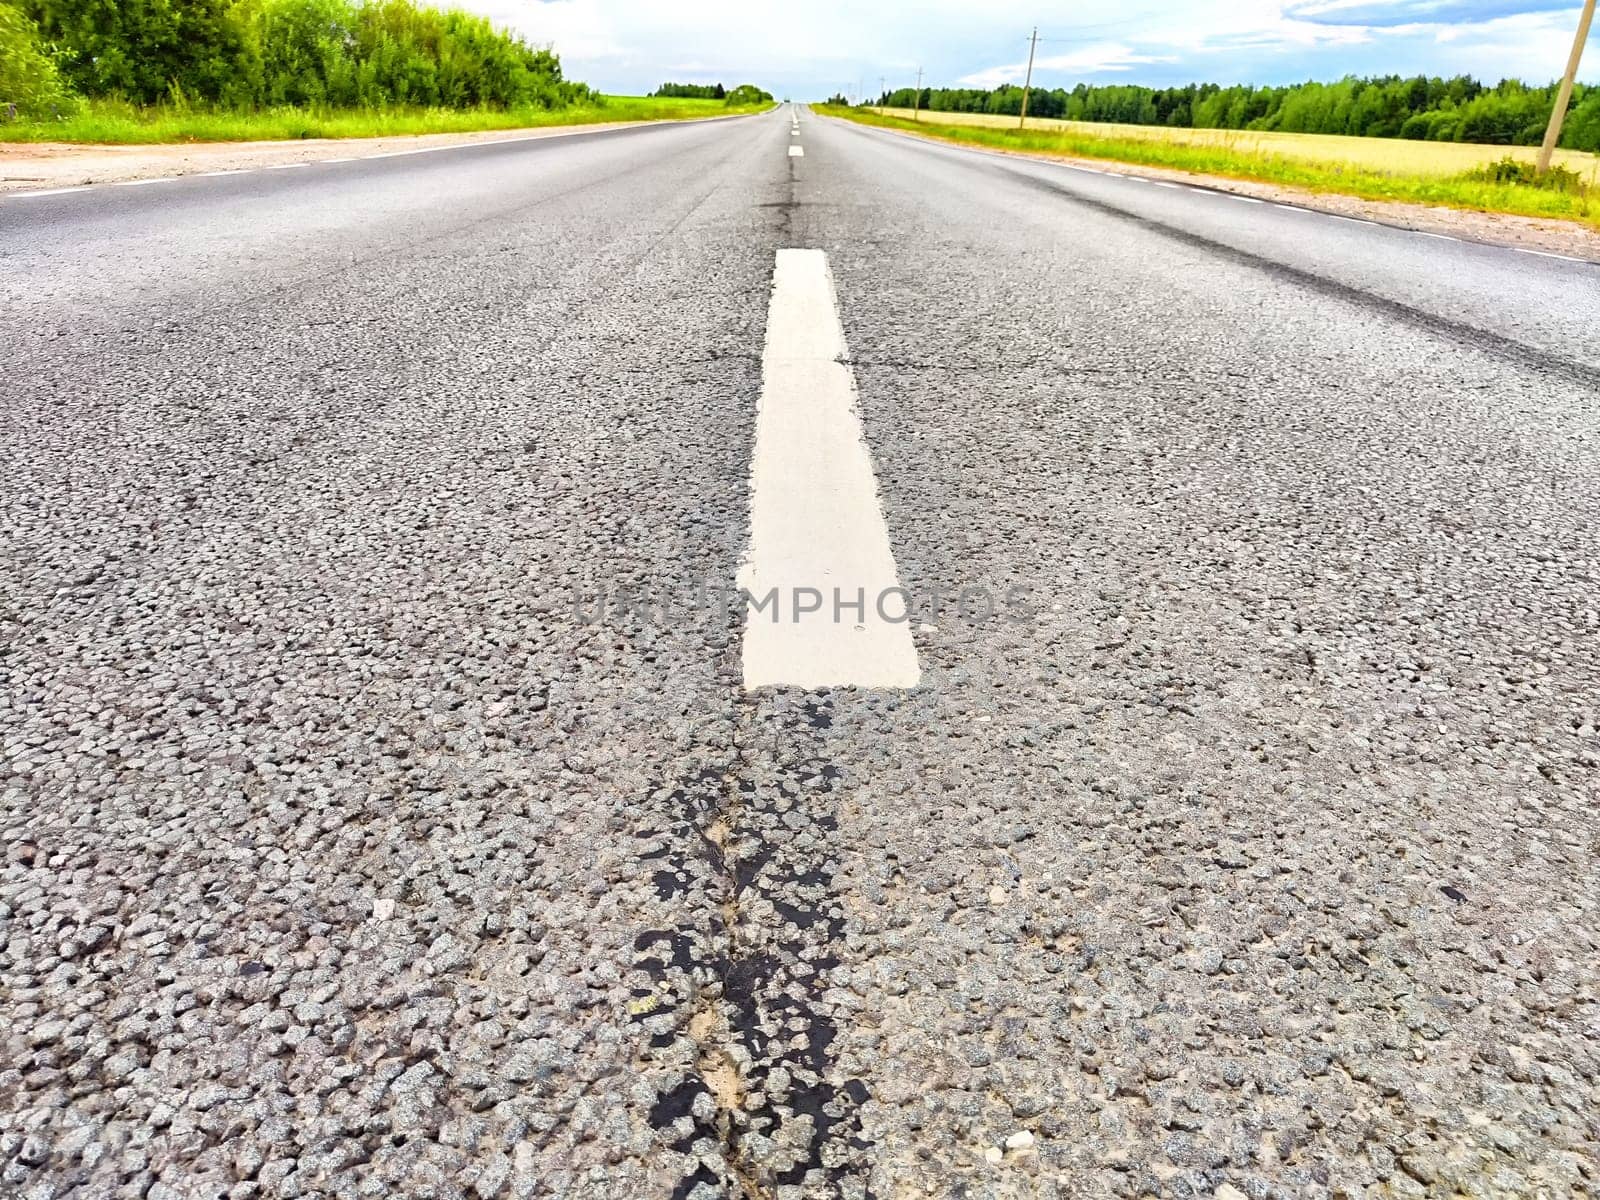 The dividing line on asphalt of the road. A new white line stark against the asphalt stretches into the distance. Open Road With Painted Dividing Line by keleny